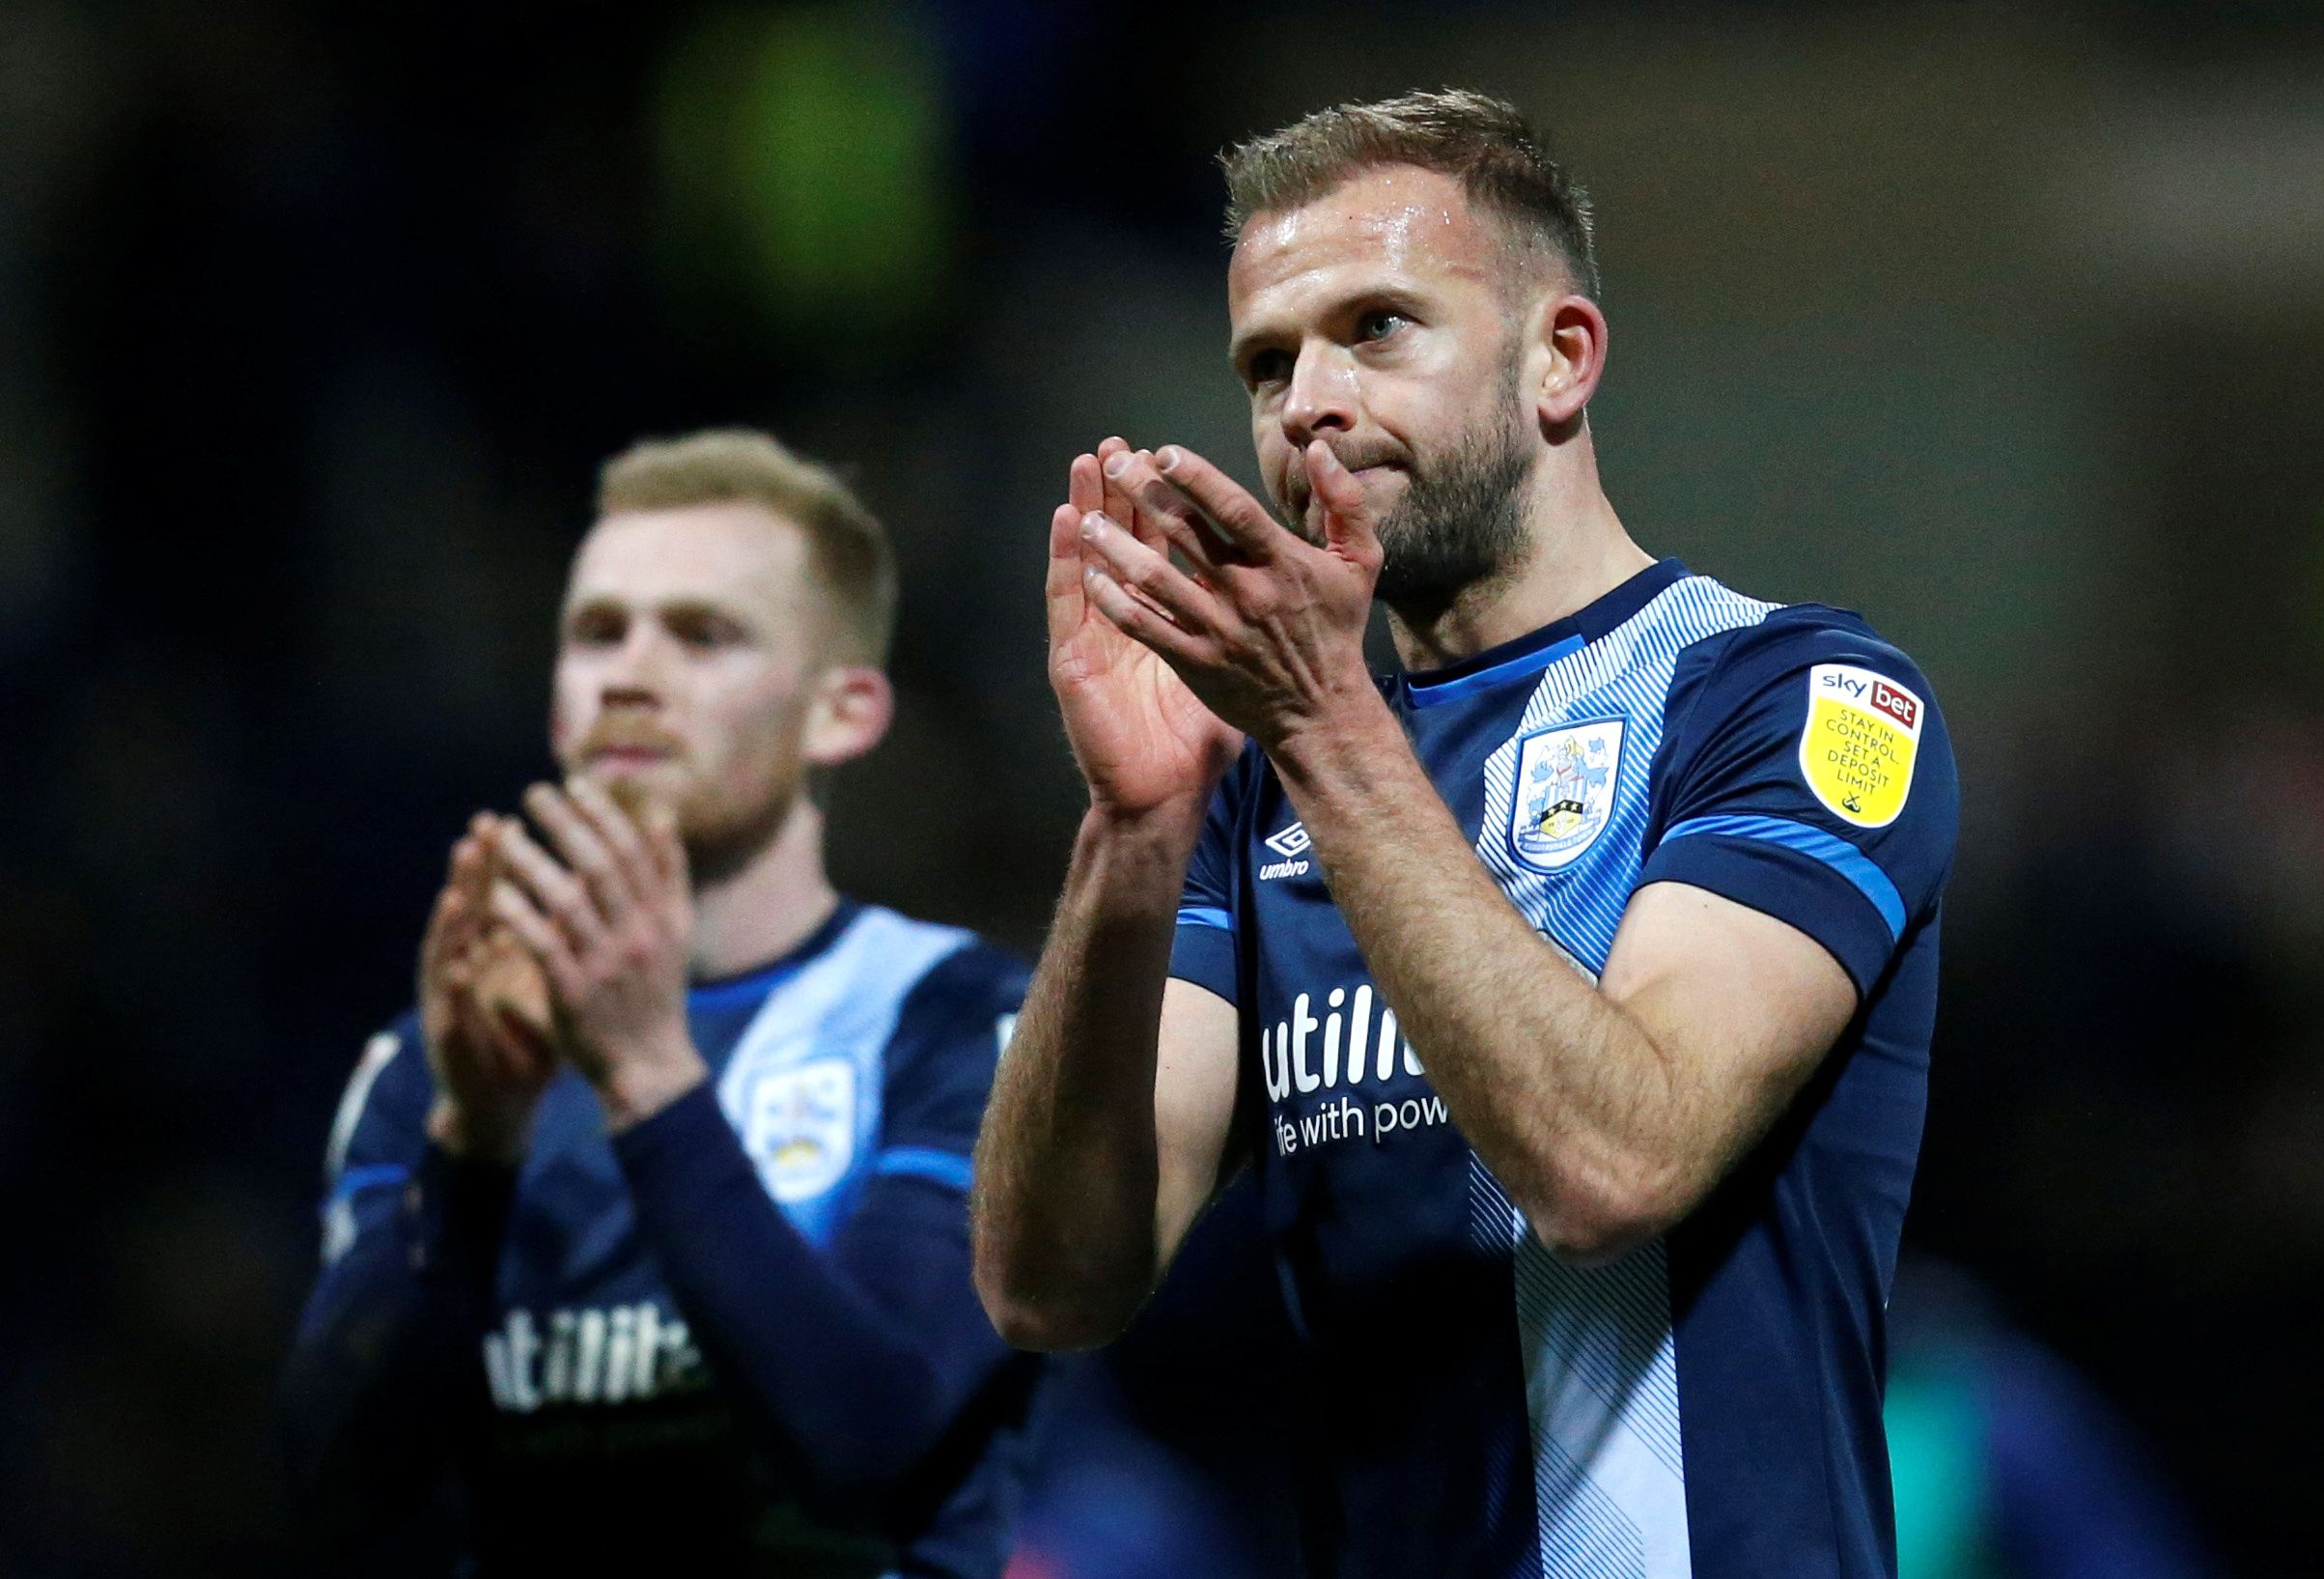 Soccer Football - Championship - Preston North End v Huddersfield Town - Deepdale, Preston, Britain - February 9, 2022  Huddersfield Town's Jordan Rhodes applauds the fans after the match  Action Images/Ed Sykes  EDITORIAL USE ONLY. No use with unauthorized audio, video, data, fixture lists, club/league logos or "live" services. Online in-match use limited to 75 images, no video emulation. No use in betting, games or single club/league/player publications.  Please contact your account representa